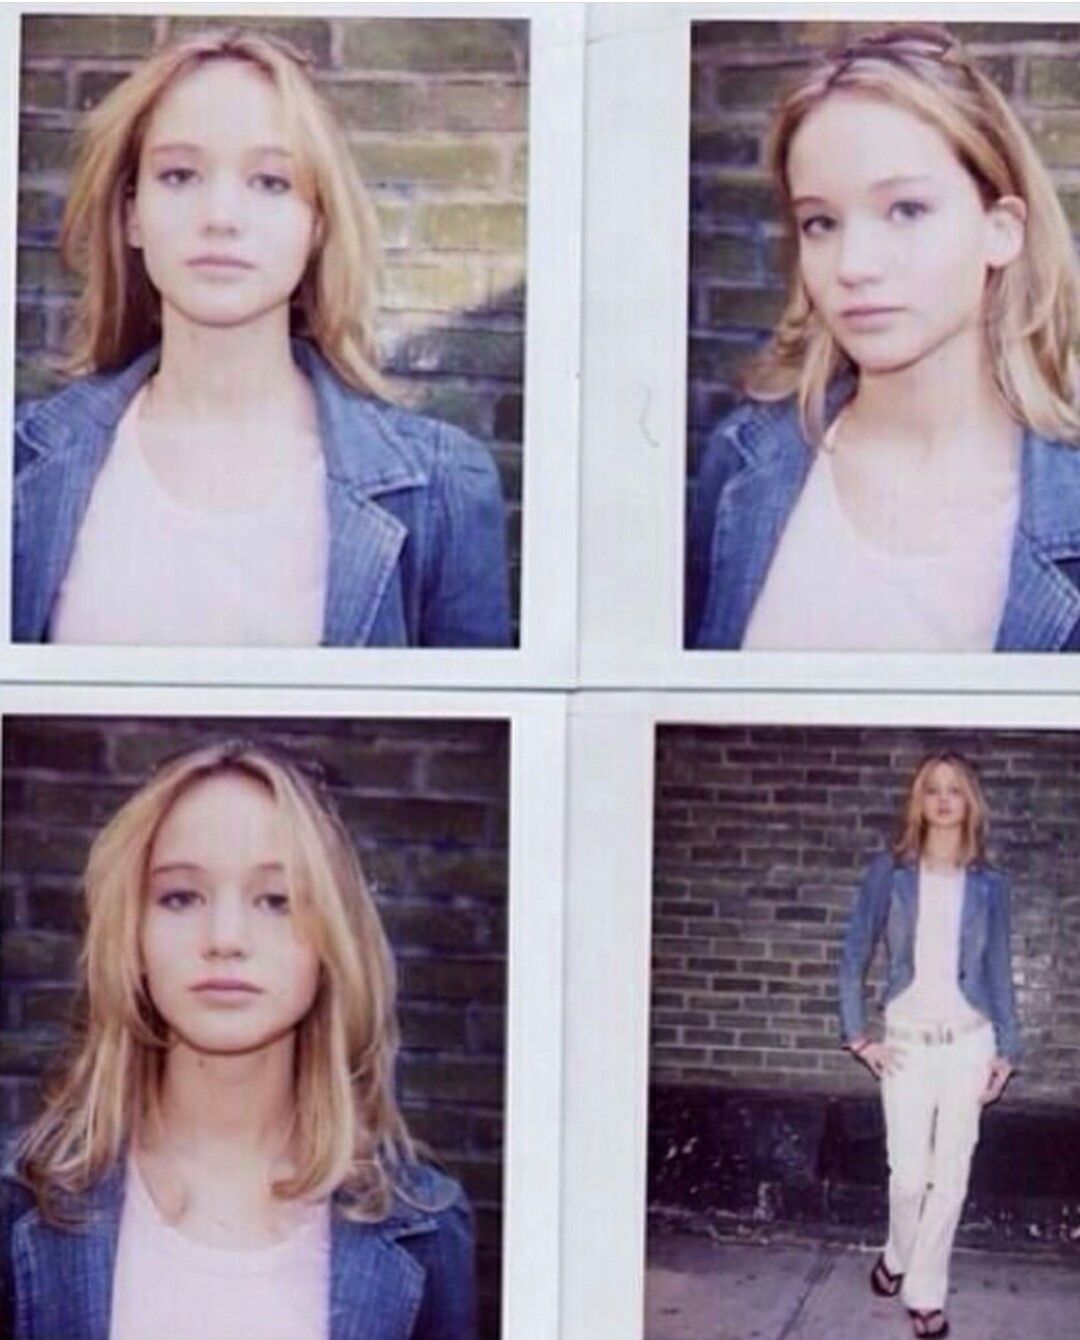 Jennifer Lawrence's polaroids from her early acting days. - Jennifer Lawrence